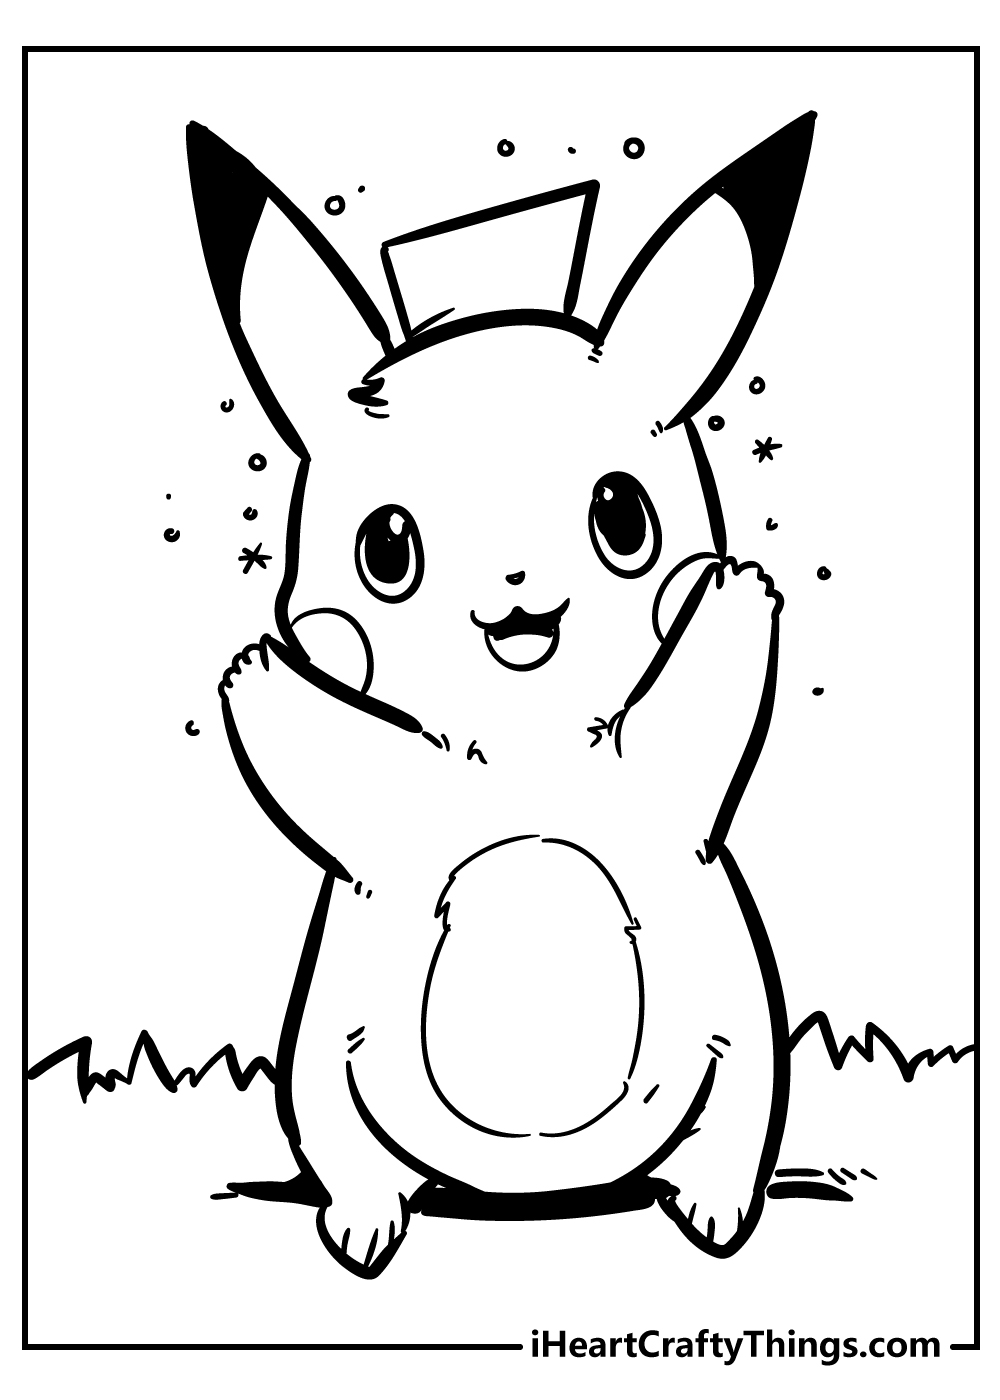 Pikachu coloring pages free pdf download